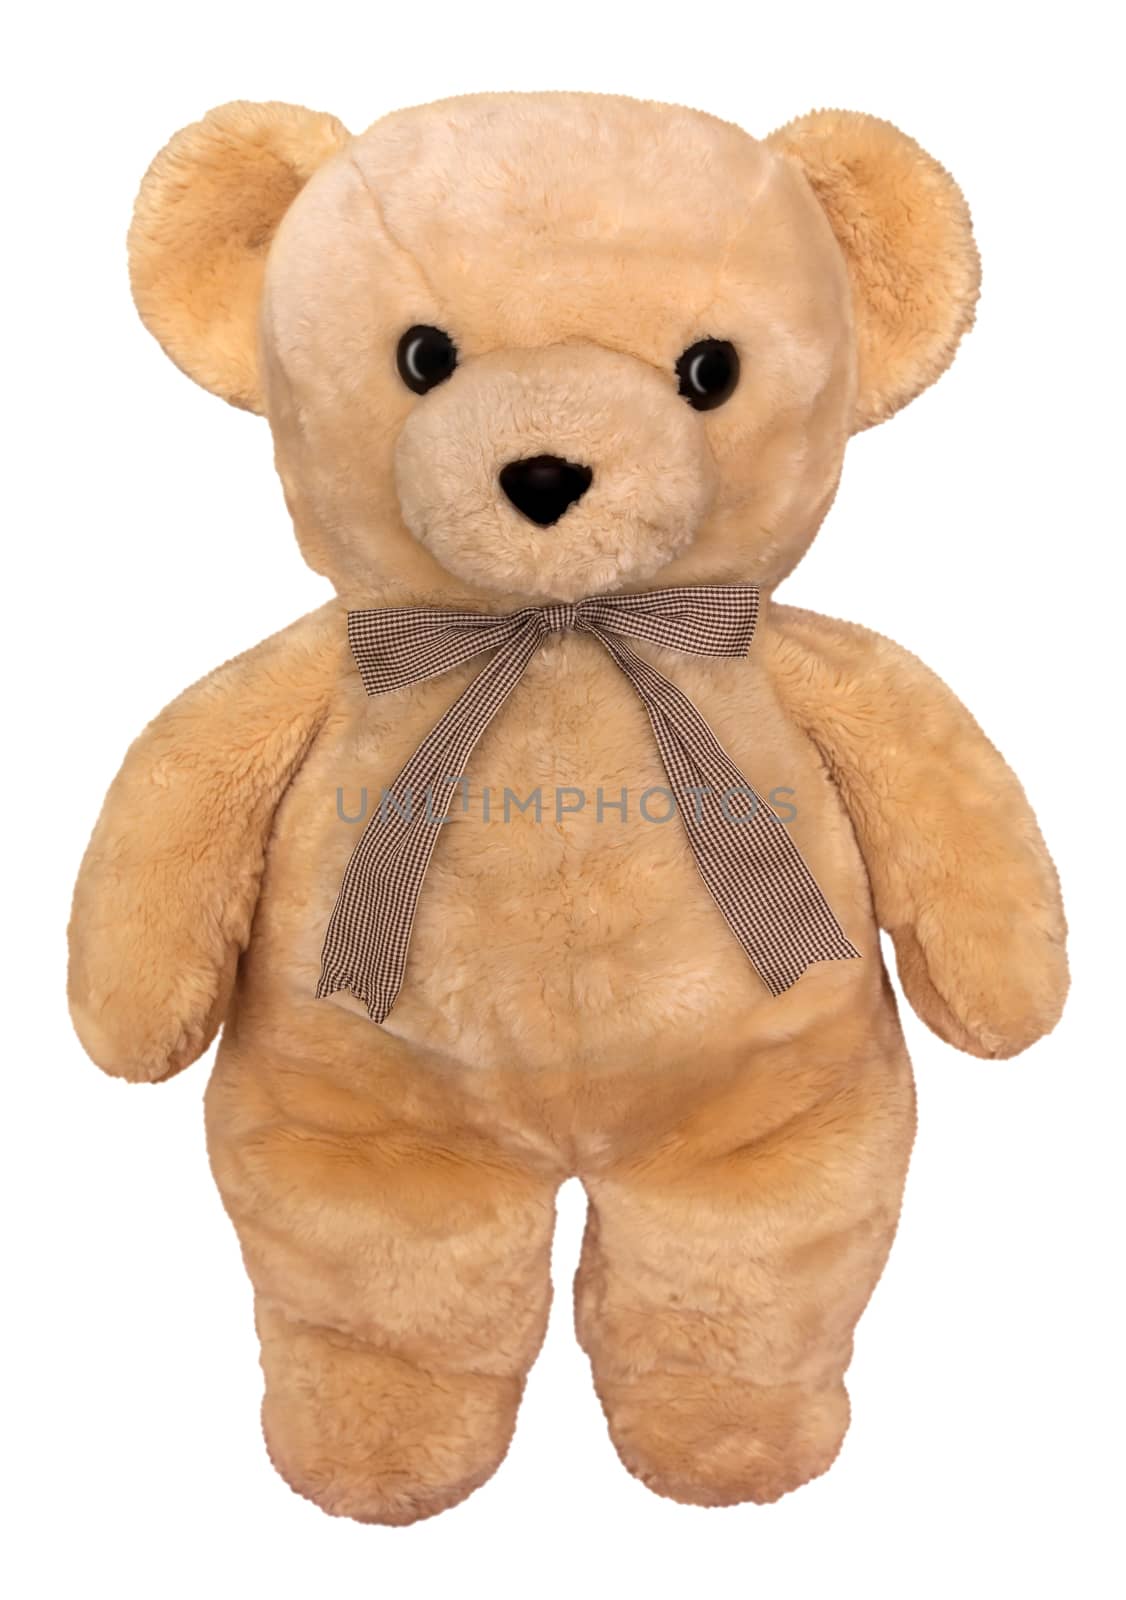 Toy teddy bear isolated on white. Clipping path included.